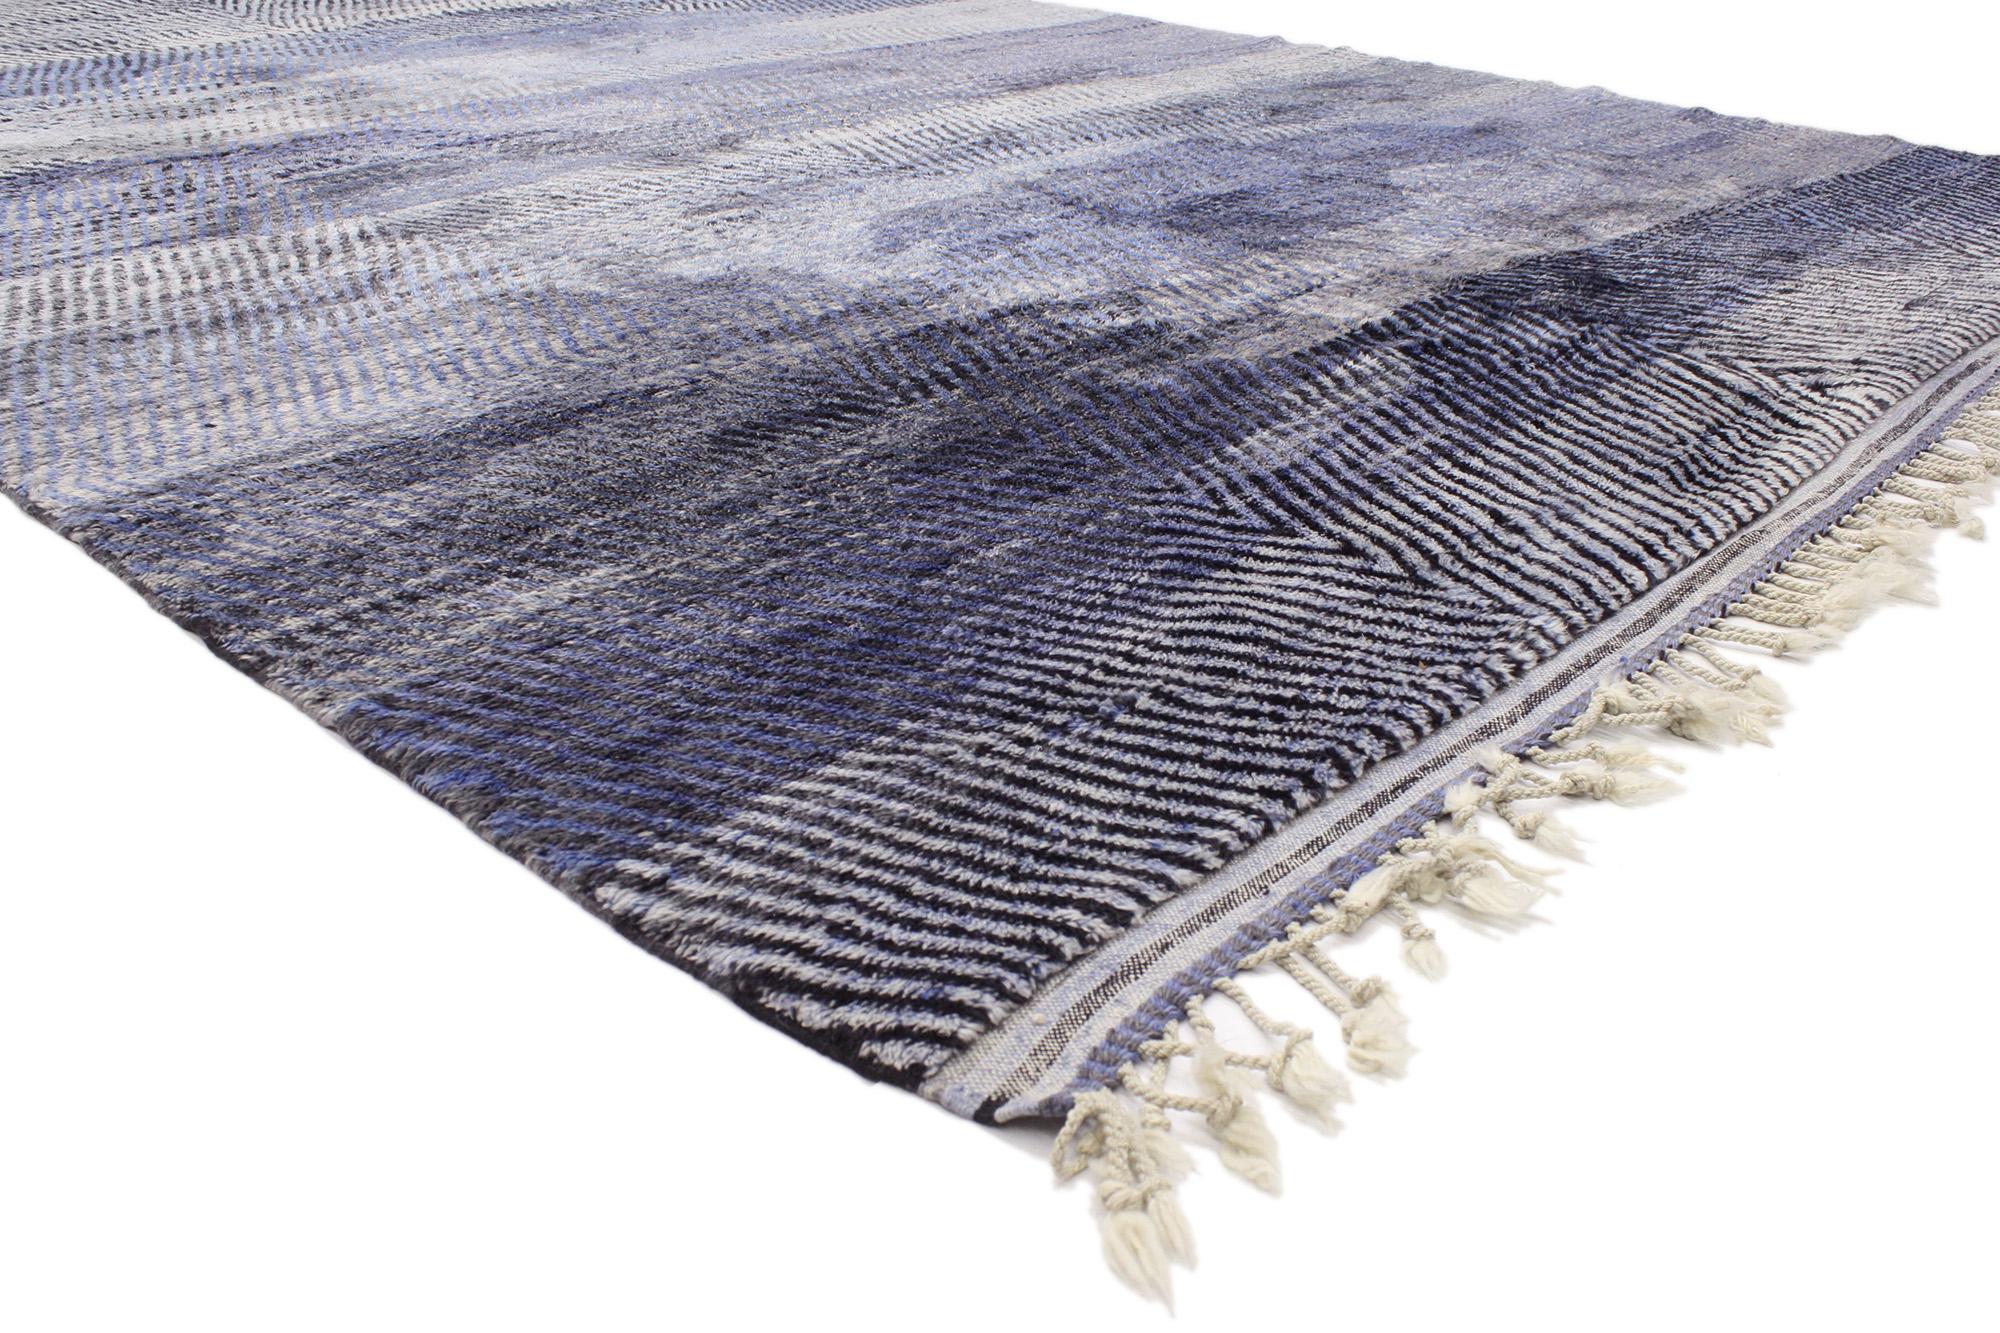 20526 Modern Blue Beni Mrirt Moroccan Rug, 09'04 x 13'02. Beni Mrirt rugs exemplify the revered tradition of Moroccan weaving, celebrated for their sumptuous texture, geometric motifs, and soothing earthy tones. Handcrafted by skilled artisans of